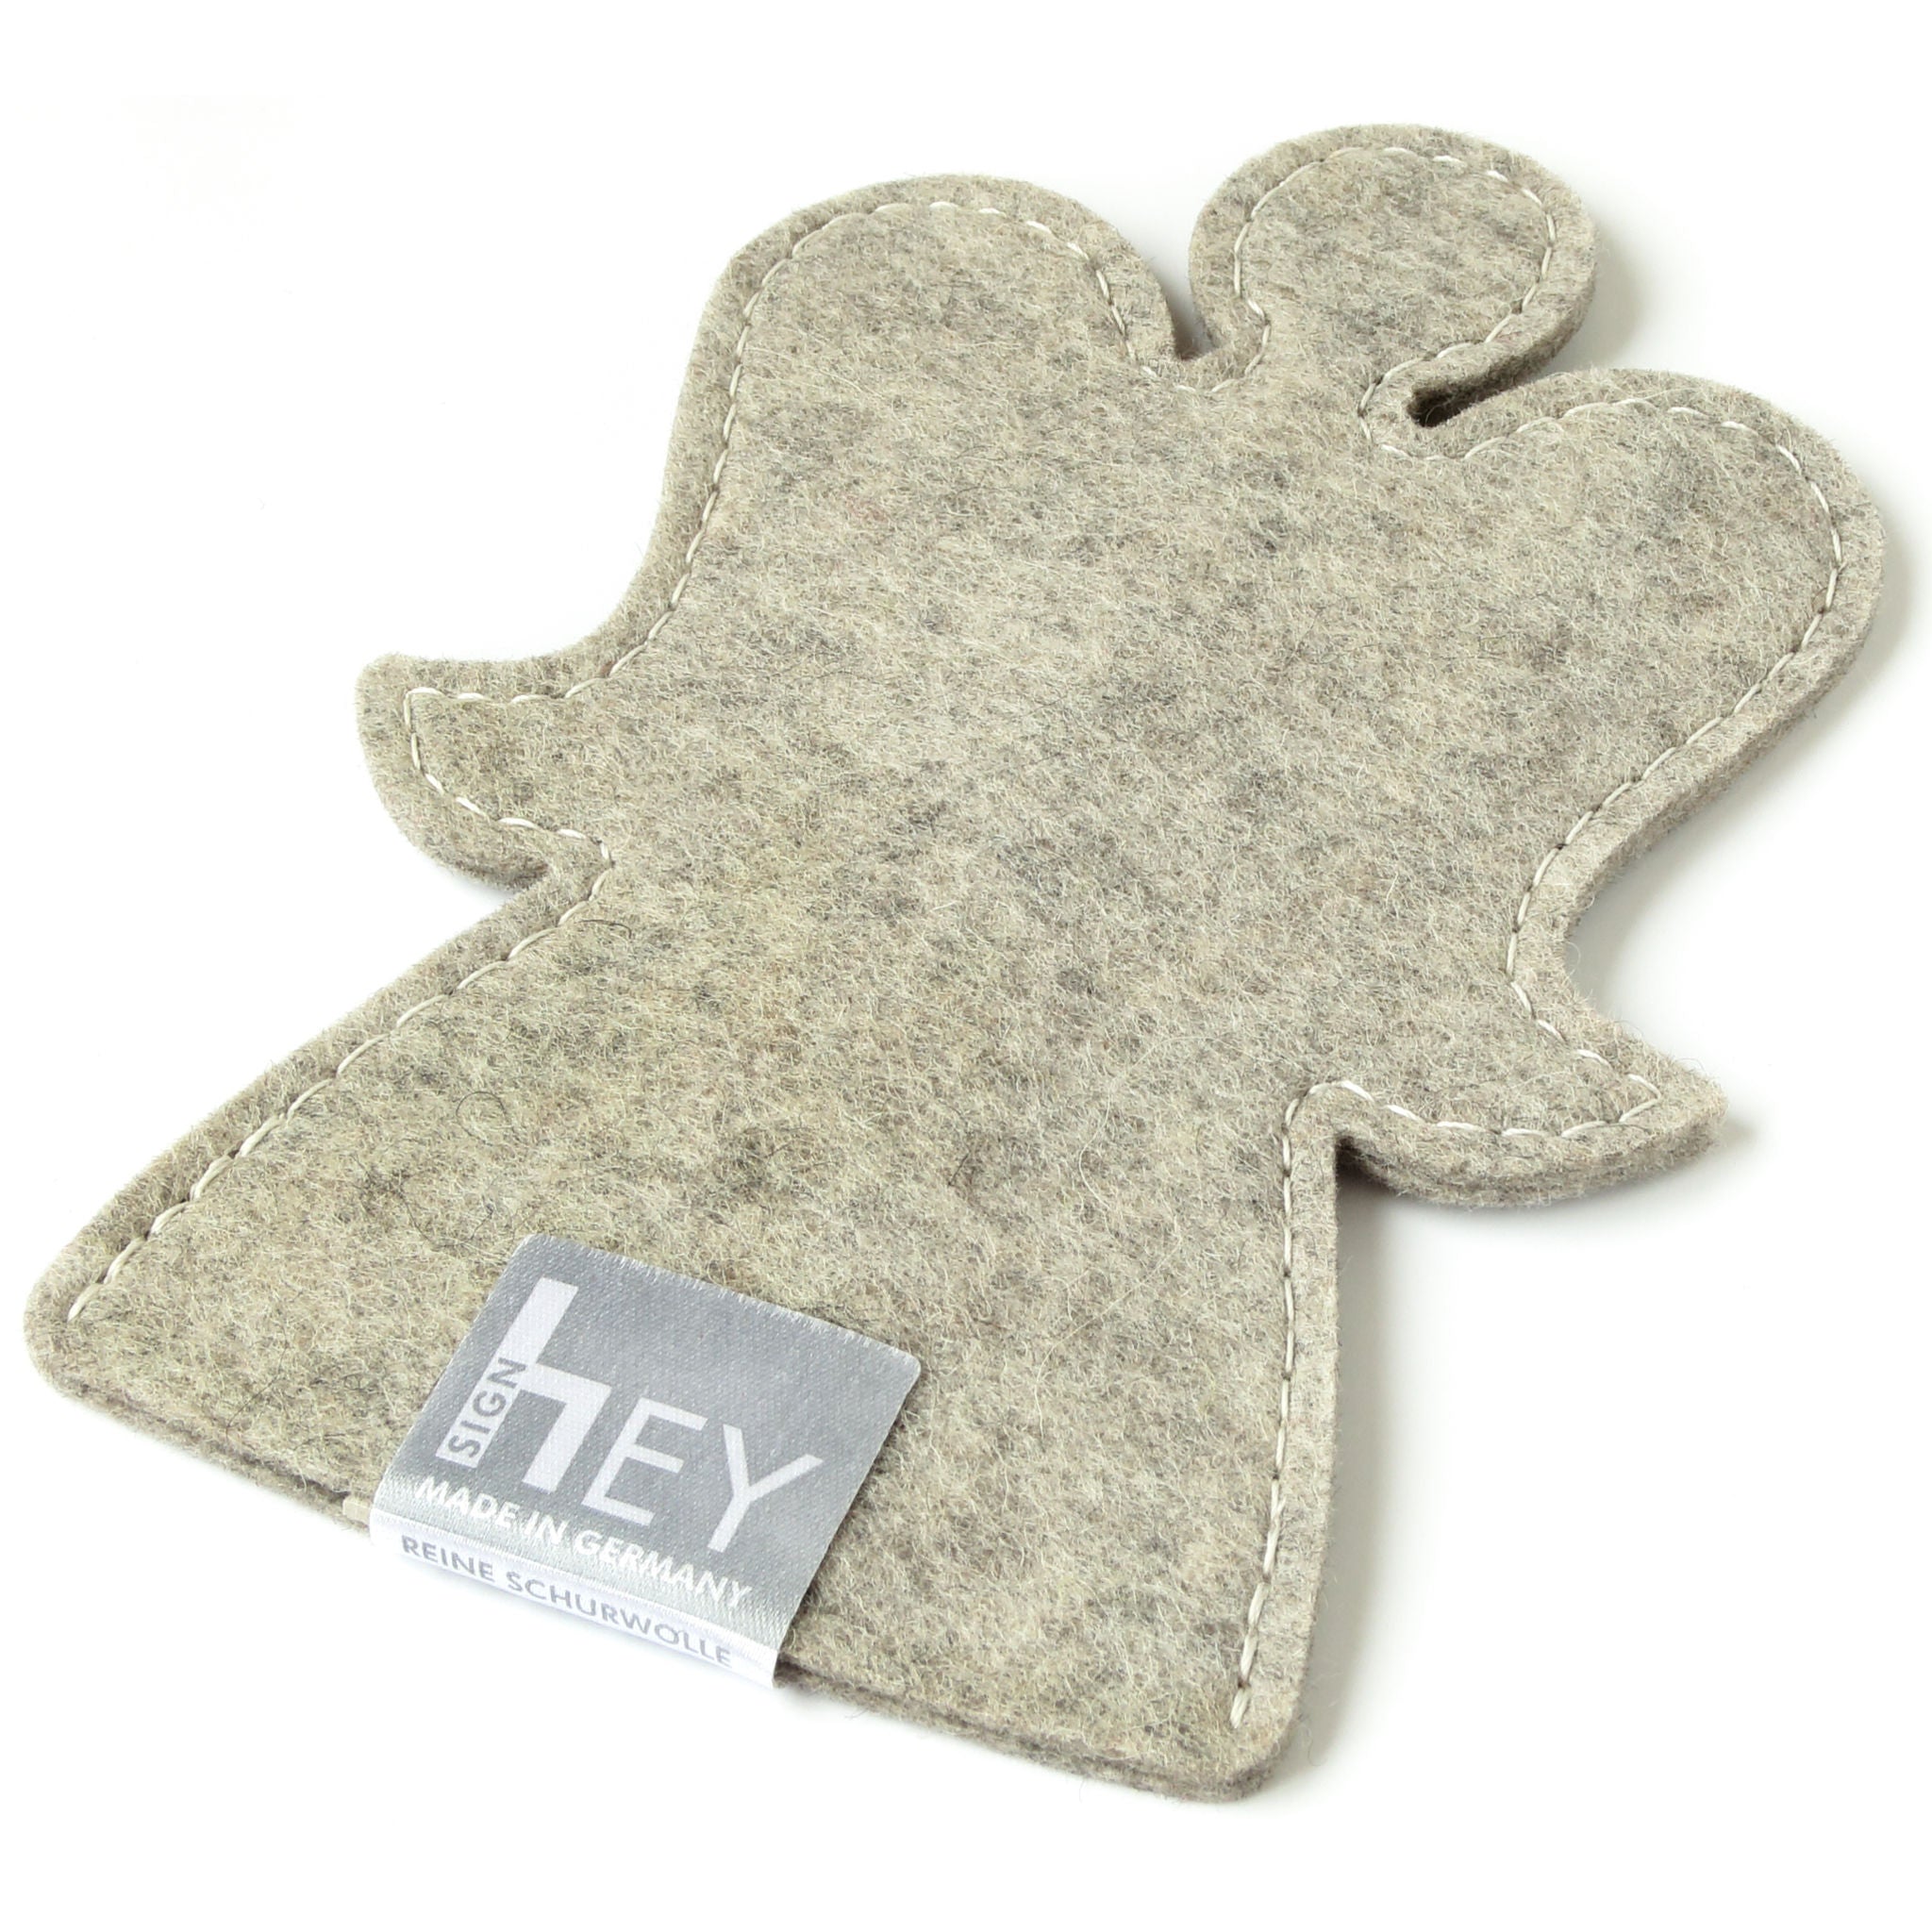 Decorative Angel in Light Grey by Hey-Sign 301151507 from Side